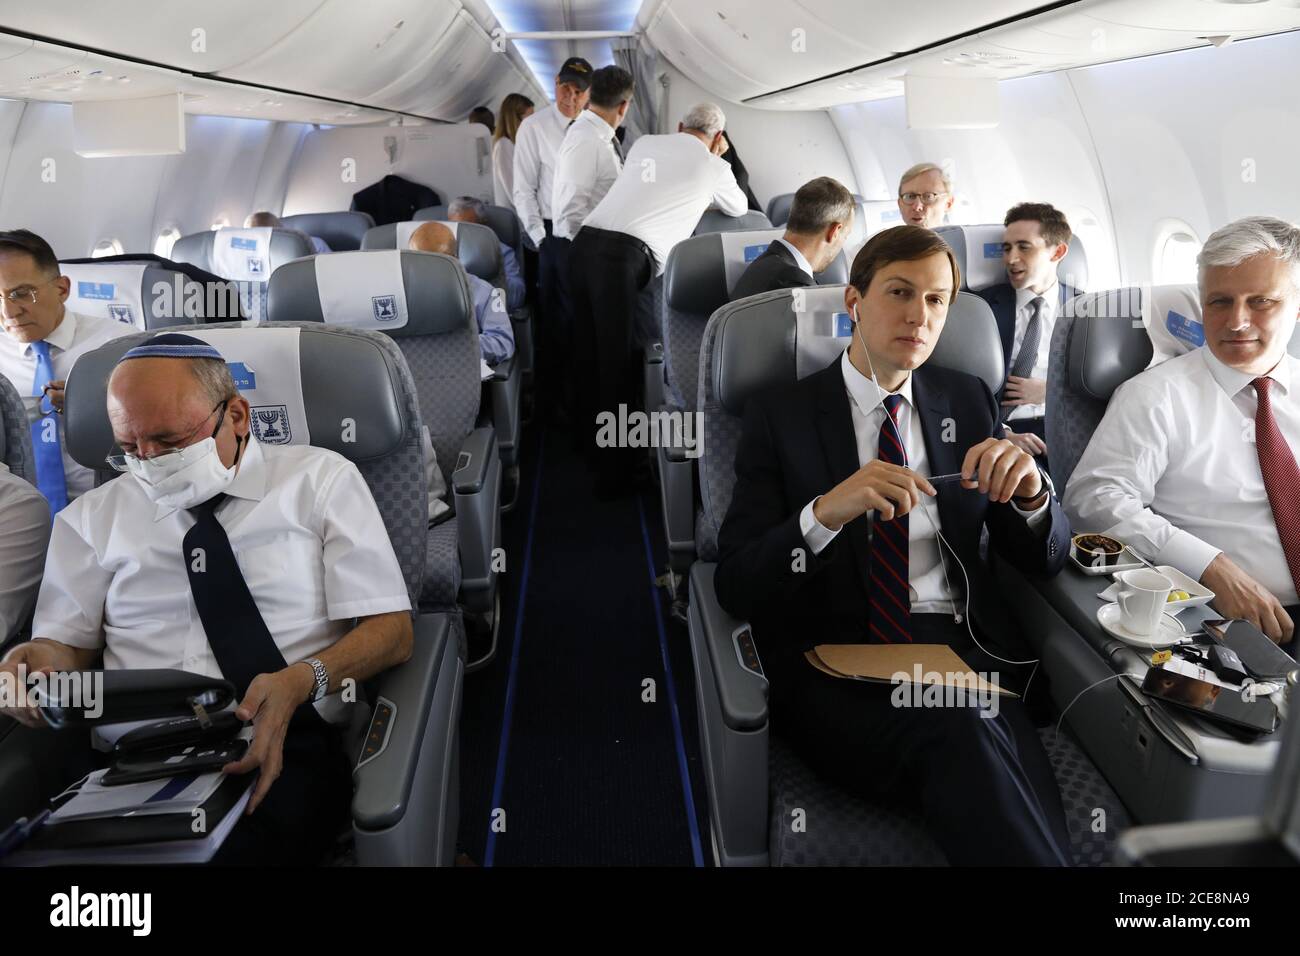 Lod, Israel. 31st Aug, 2020. Israeli National Security Advisor Meir Ben-Shabbat, U.S. National Security Advisor Robert O'Brien and U.S. President's senior adviser Jared Kushner are seated during a flight on Israeli flag carrier El Al airliner to Abu Dhabi, United Arab Emirates on Monday, August 31, 2020. There are scheduled talks to put final touches on the normalization deal between the United Arab Emirates and Israel. Pool Photo by Nir Elias/UPI Credit: UPI/Alamy Live News Stock Photo